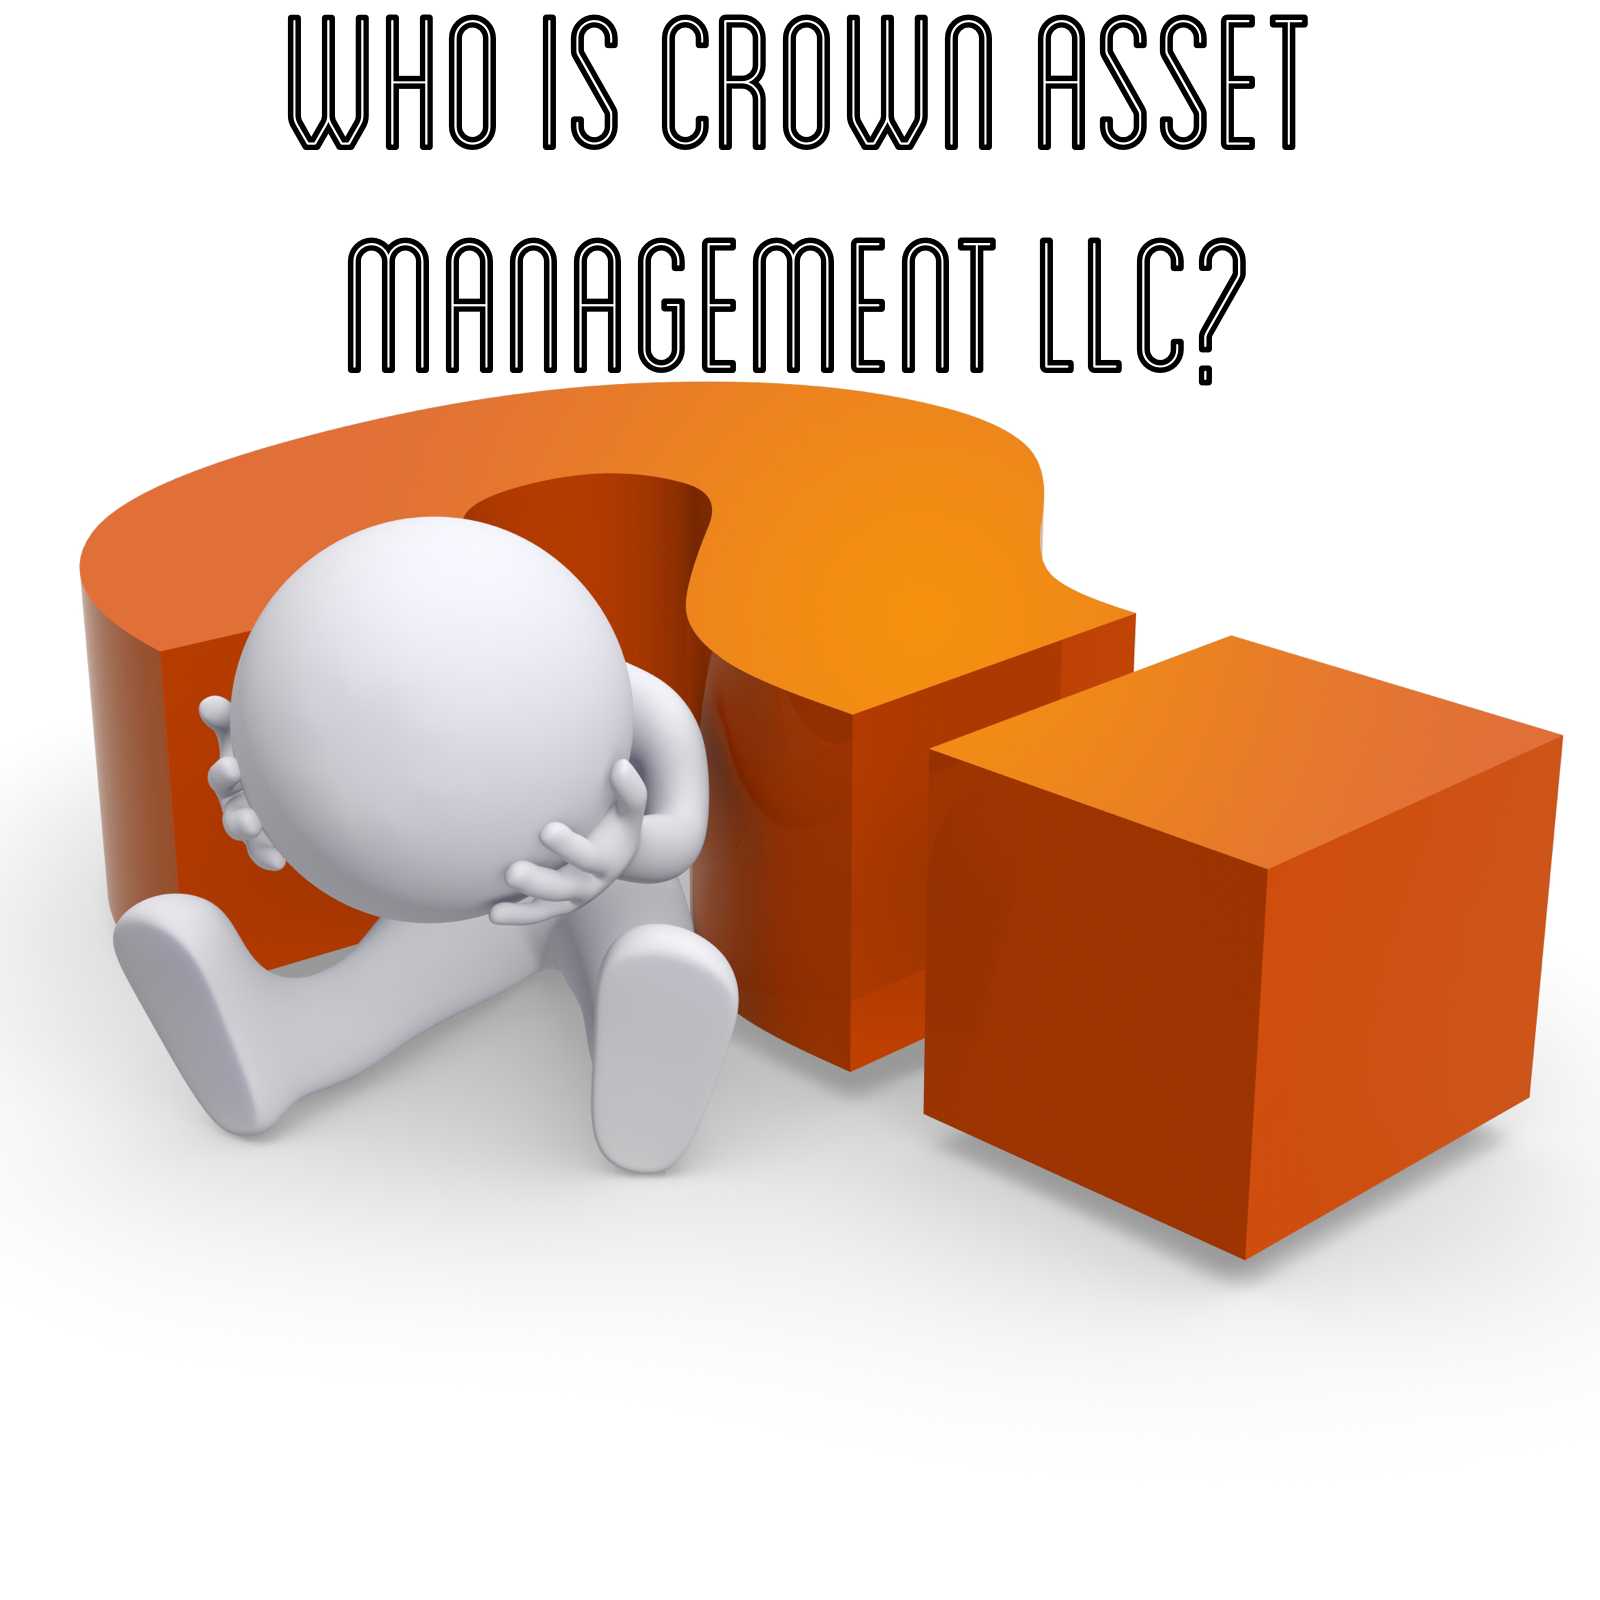 Sued By Crown Asset Management LLC In New York or New Jersey?